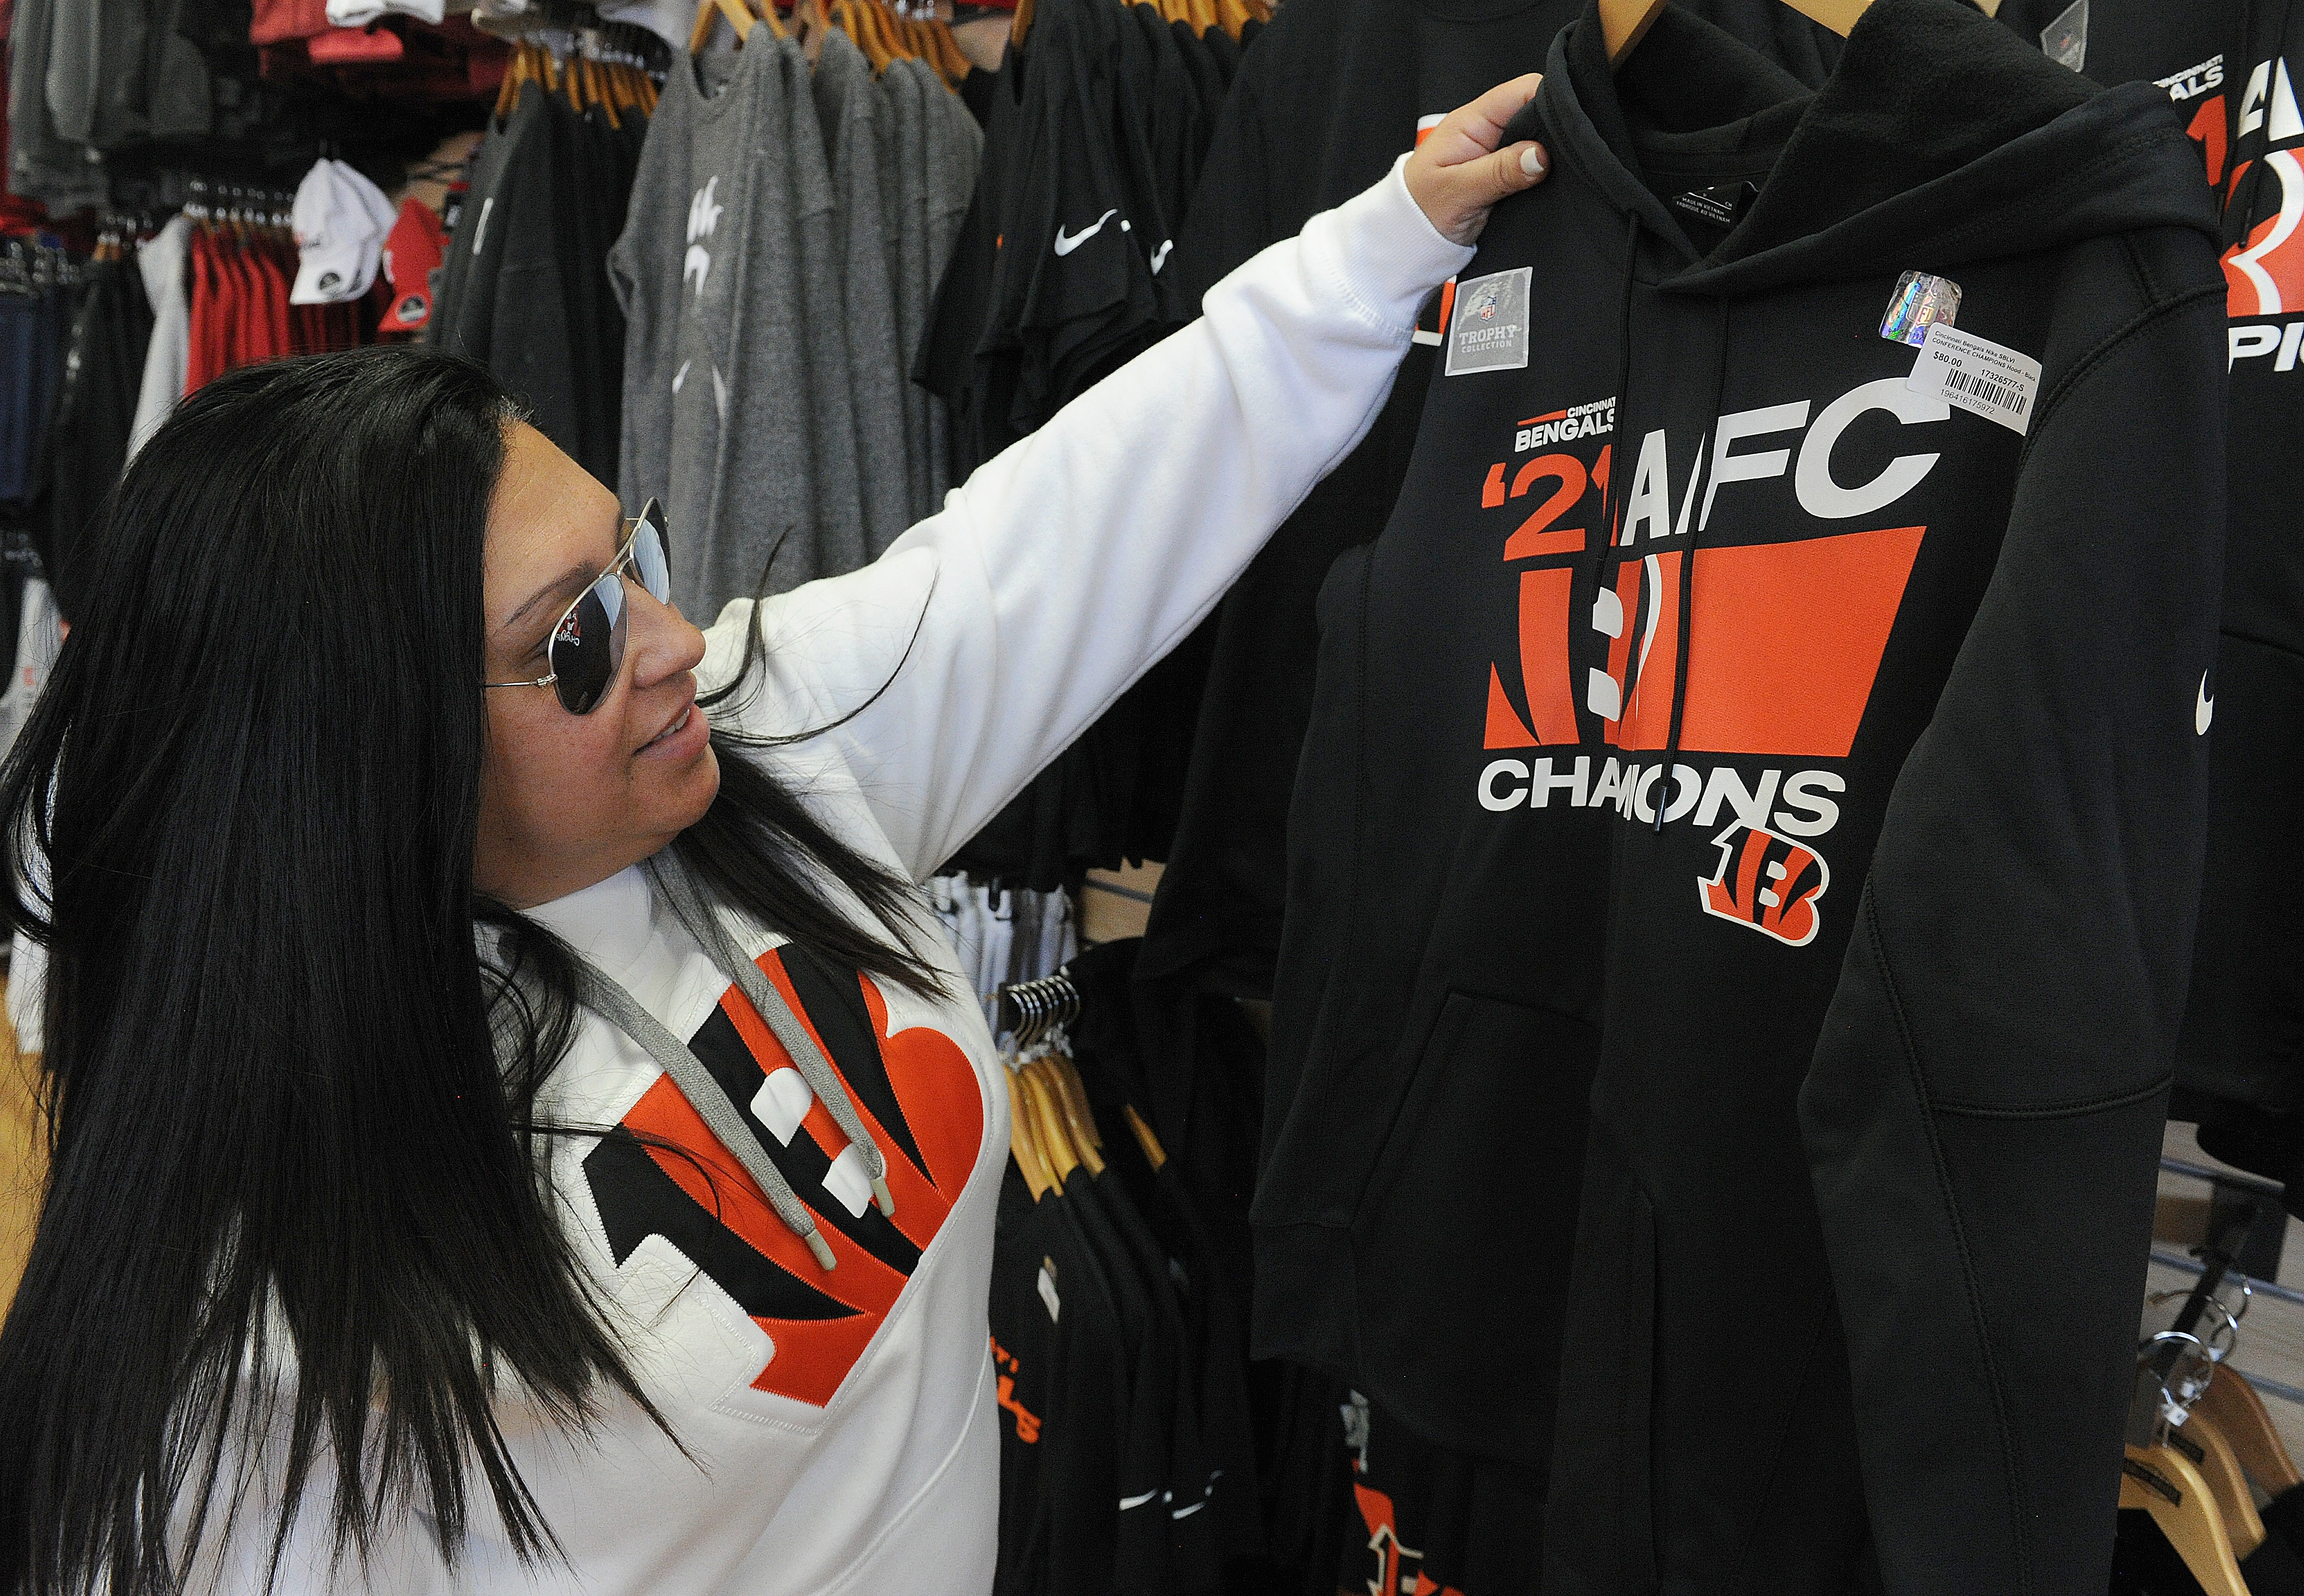 Area businesses buoyed by Bengals success